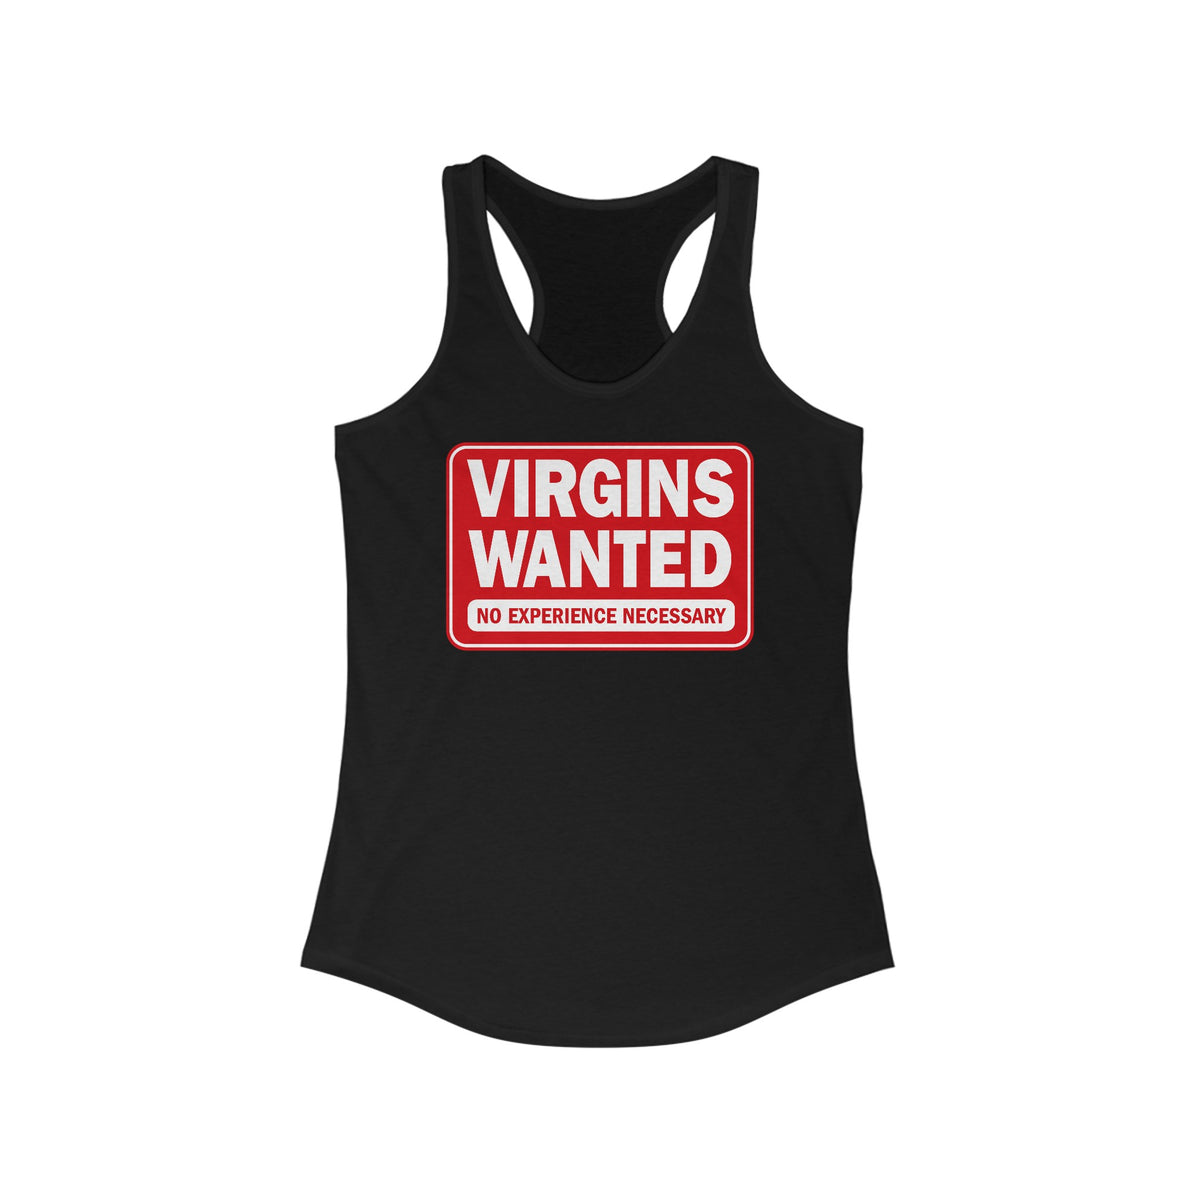 Virgins Wanted No Experience Necessary - Women’s Racerback Tank